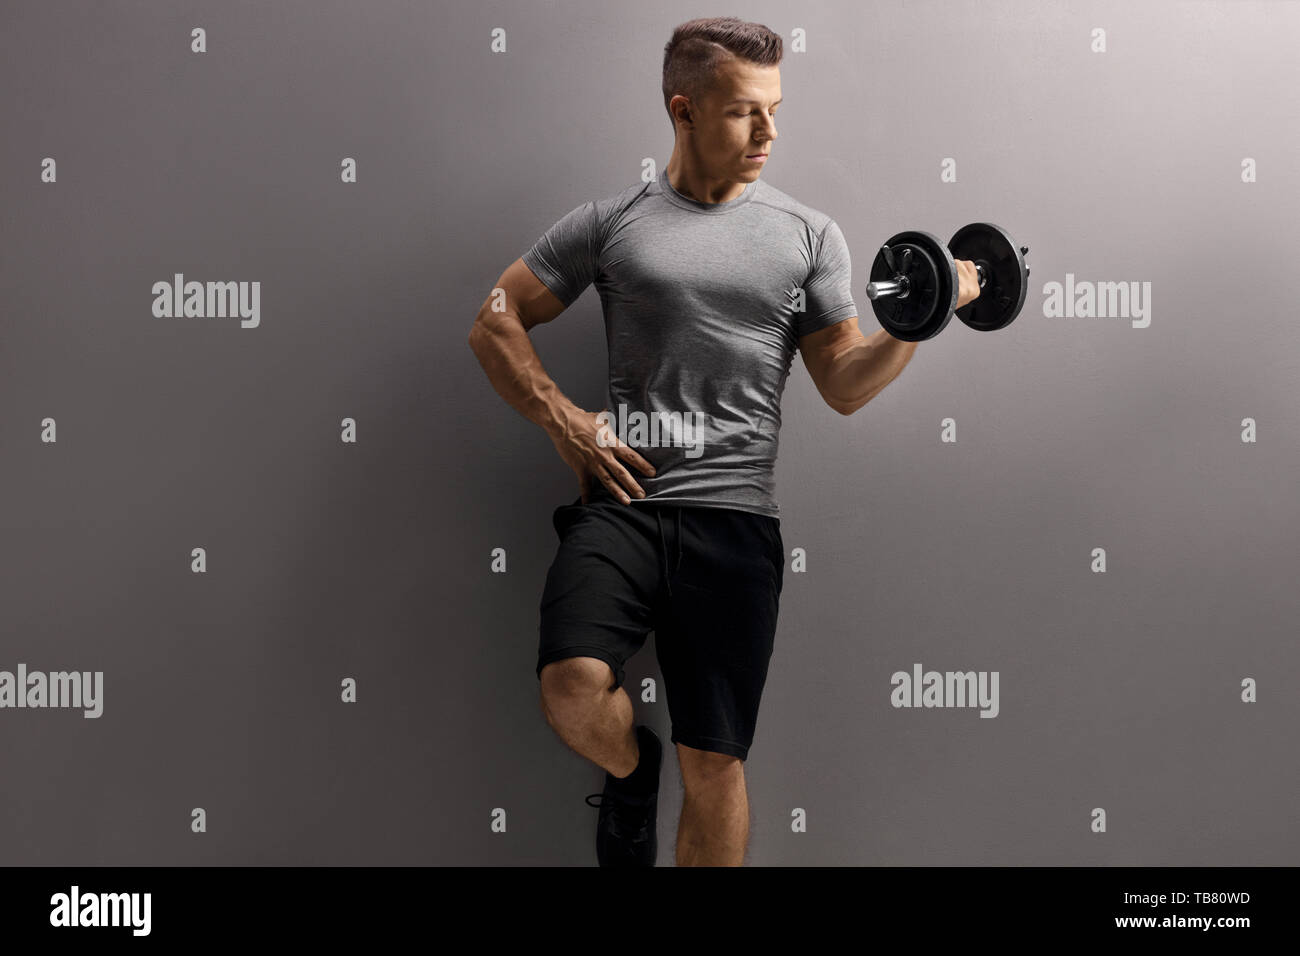 Young muscular man lifting a dumbbell against a gray wall Stock Photo